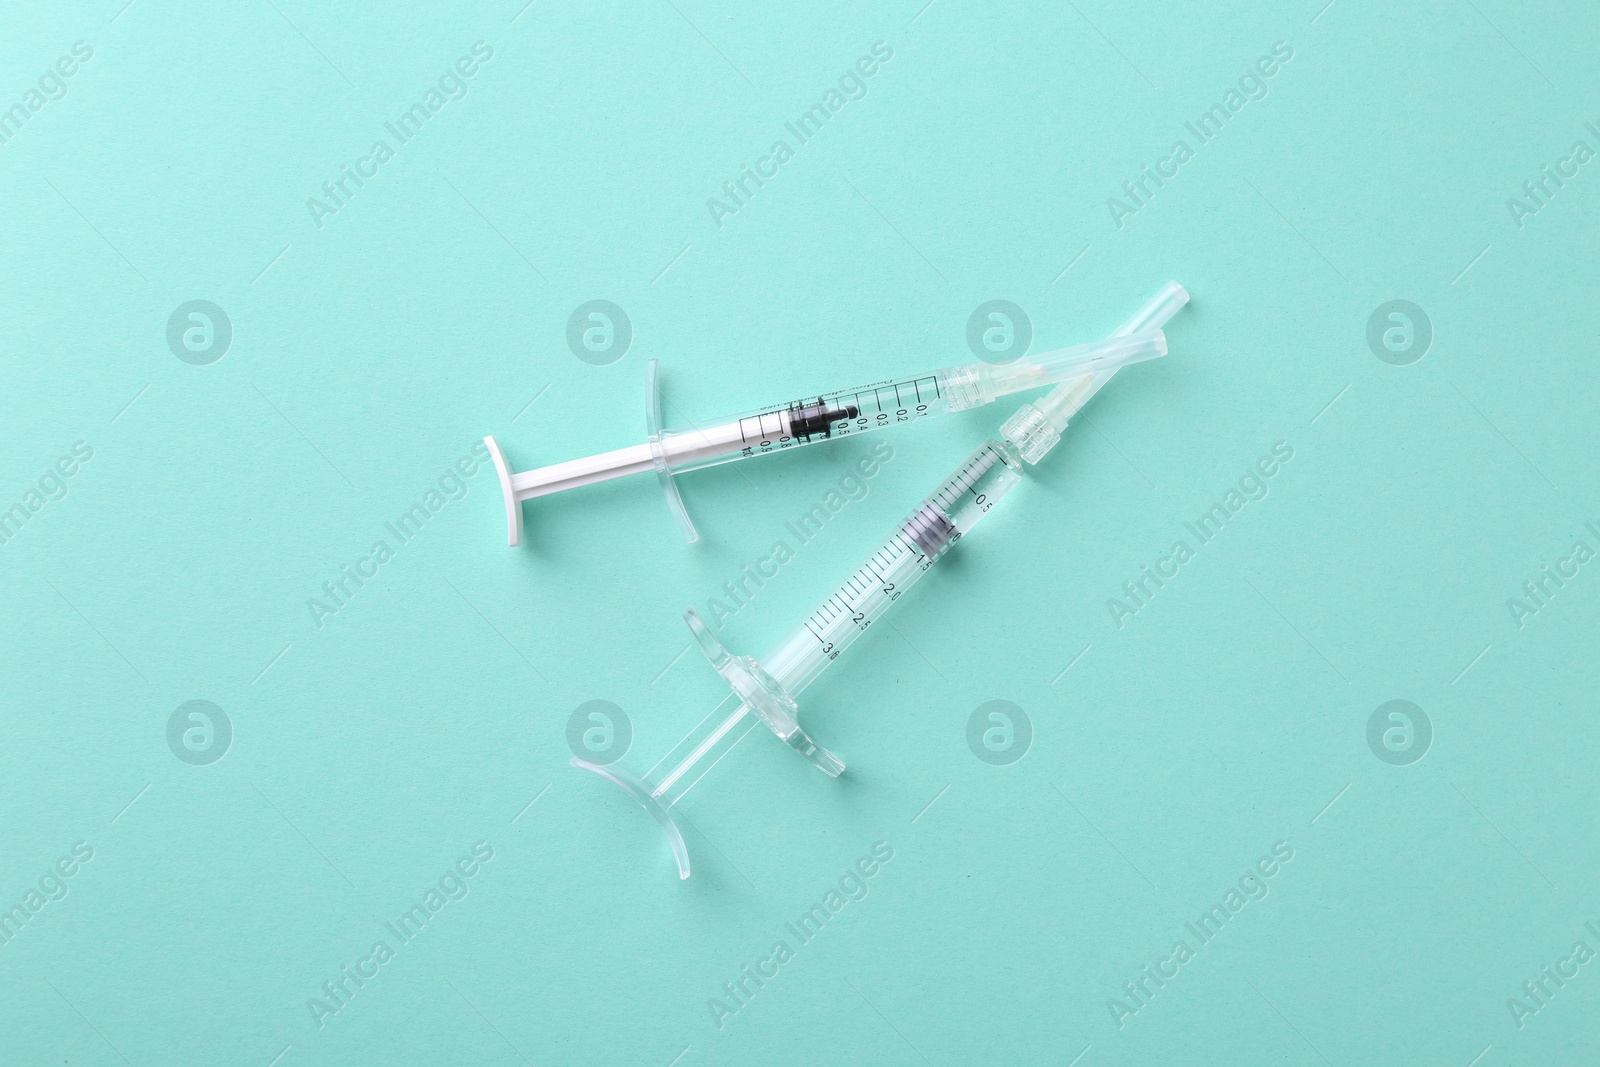 Photo of Injection cosmetology. Two medical syringes on turquoise background, top view